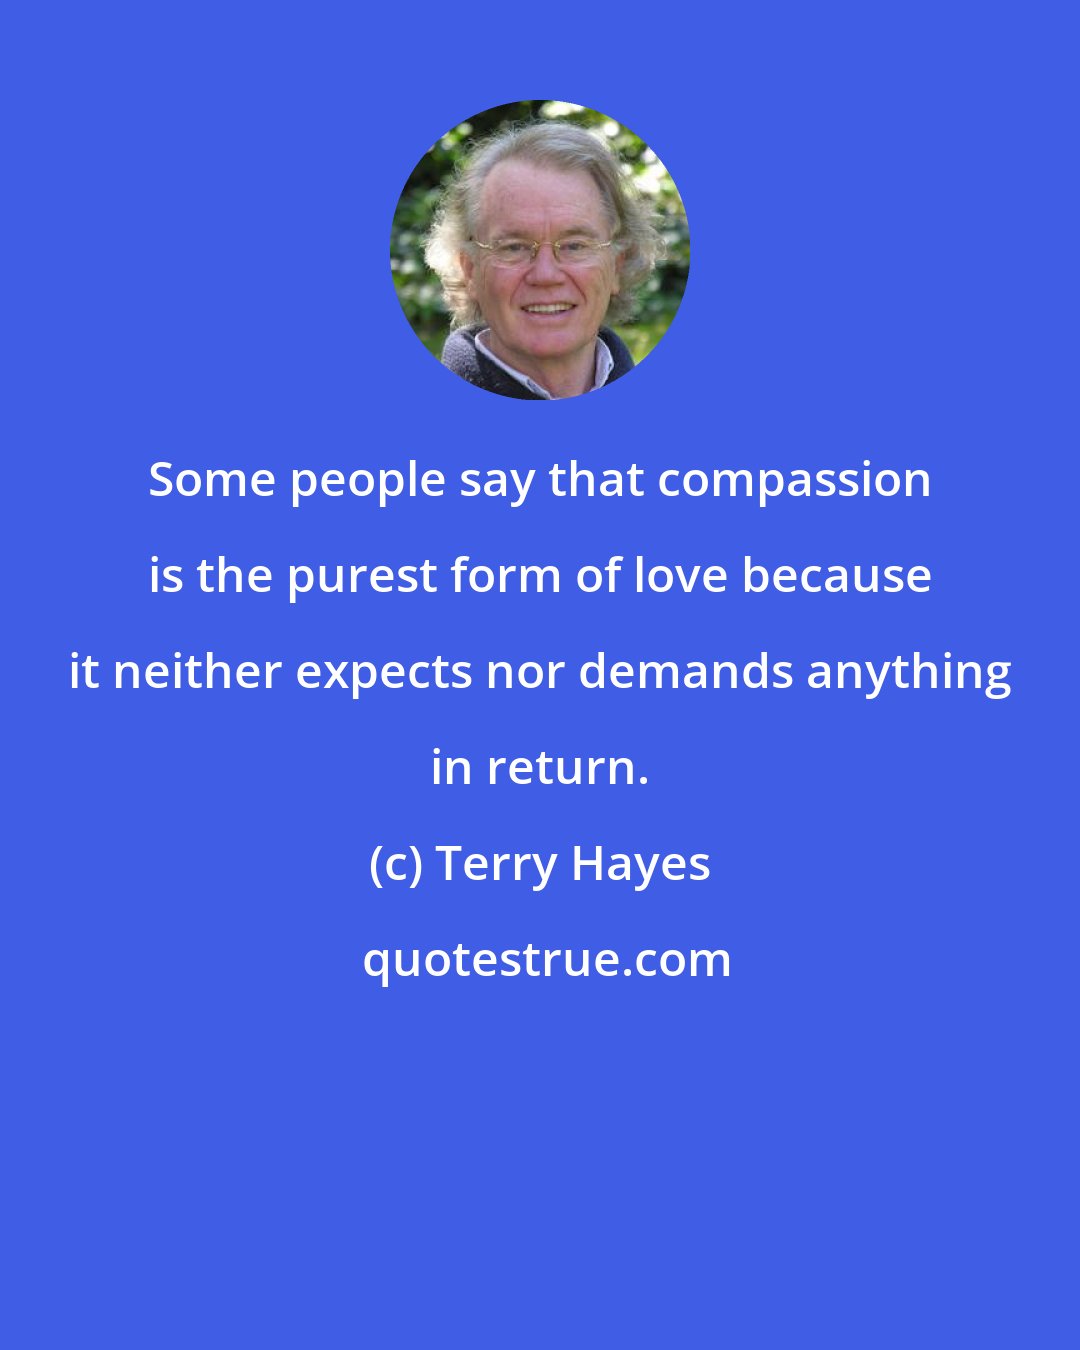 Terry Hayes: Some people say that compassion is the purest form of love because it neither expects nor demands anything in return.